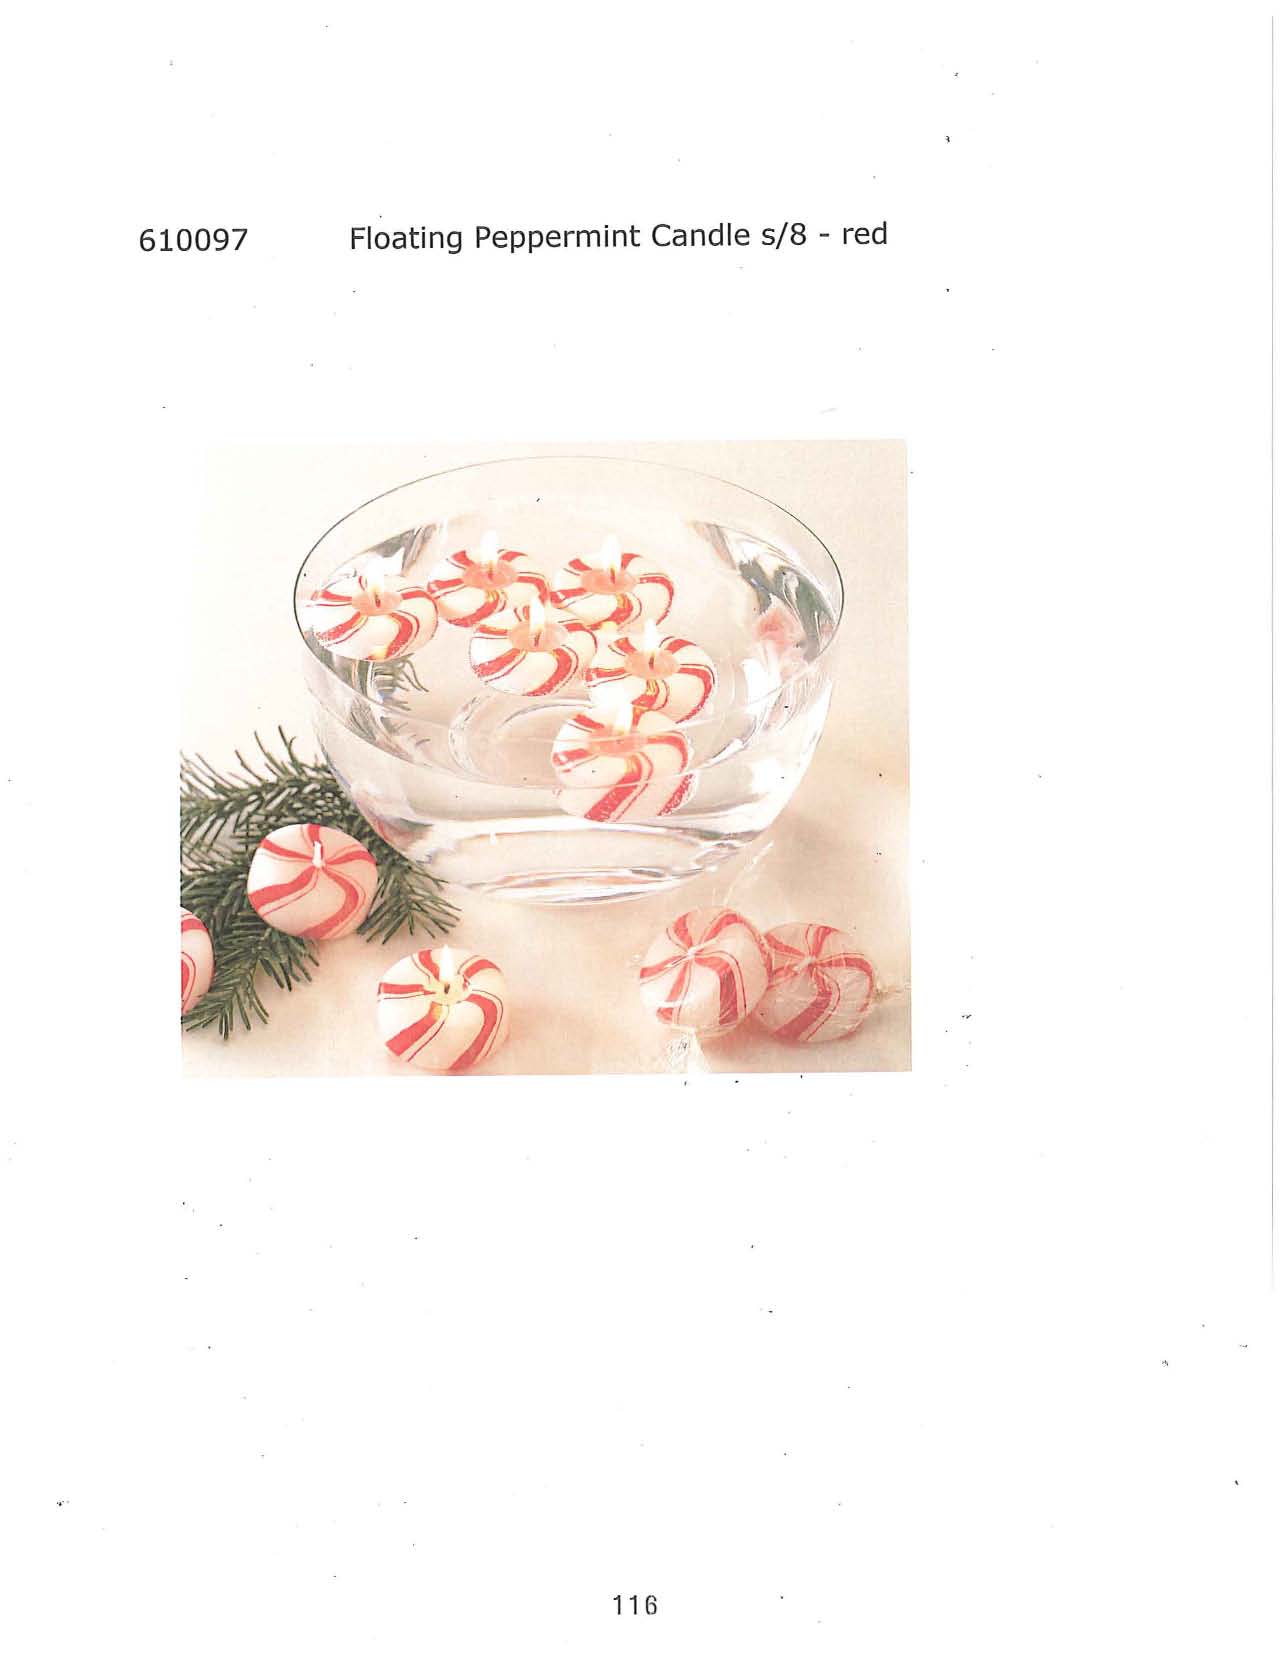 Floating Peppermint Candle s/8 - Red